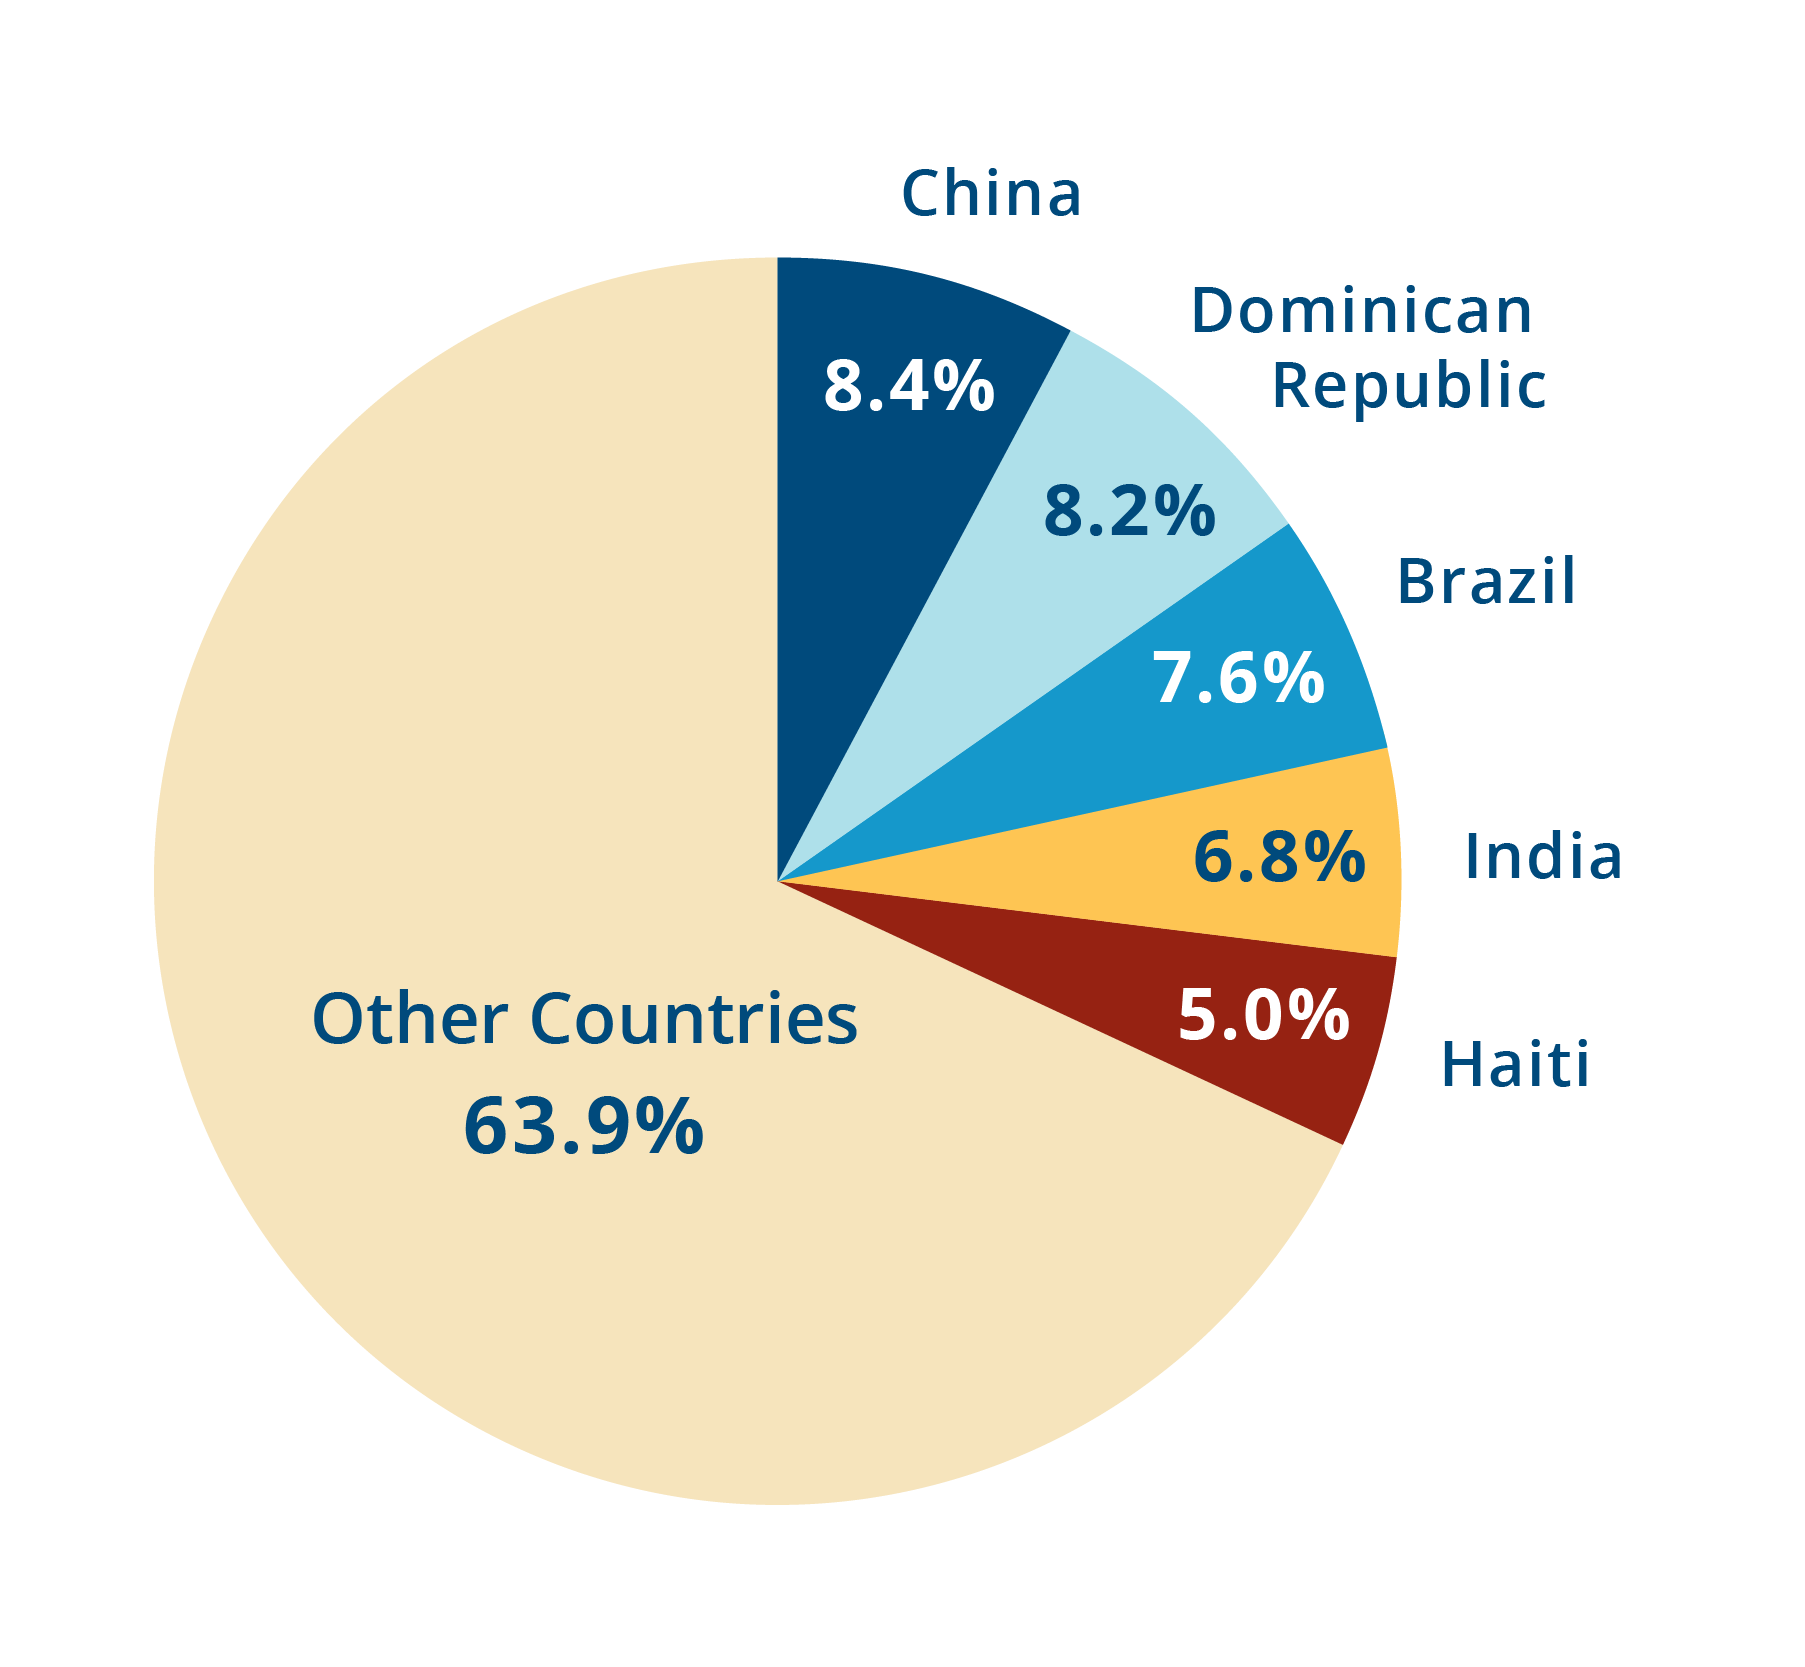 Pie chart showing that the five largest immigrant populations in Massachusetts are from China (8.4%), the Dominican Republic (8.2%), Brazil (7.6%), India (6.8%) and Haiti (5.0%).